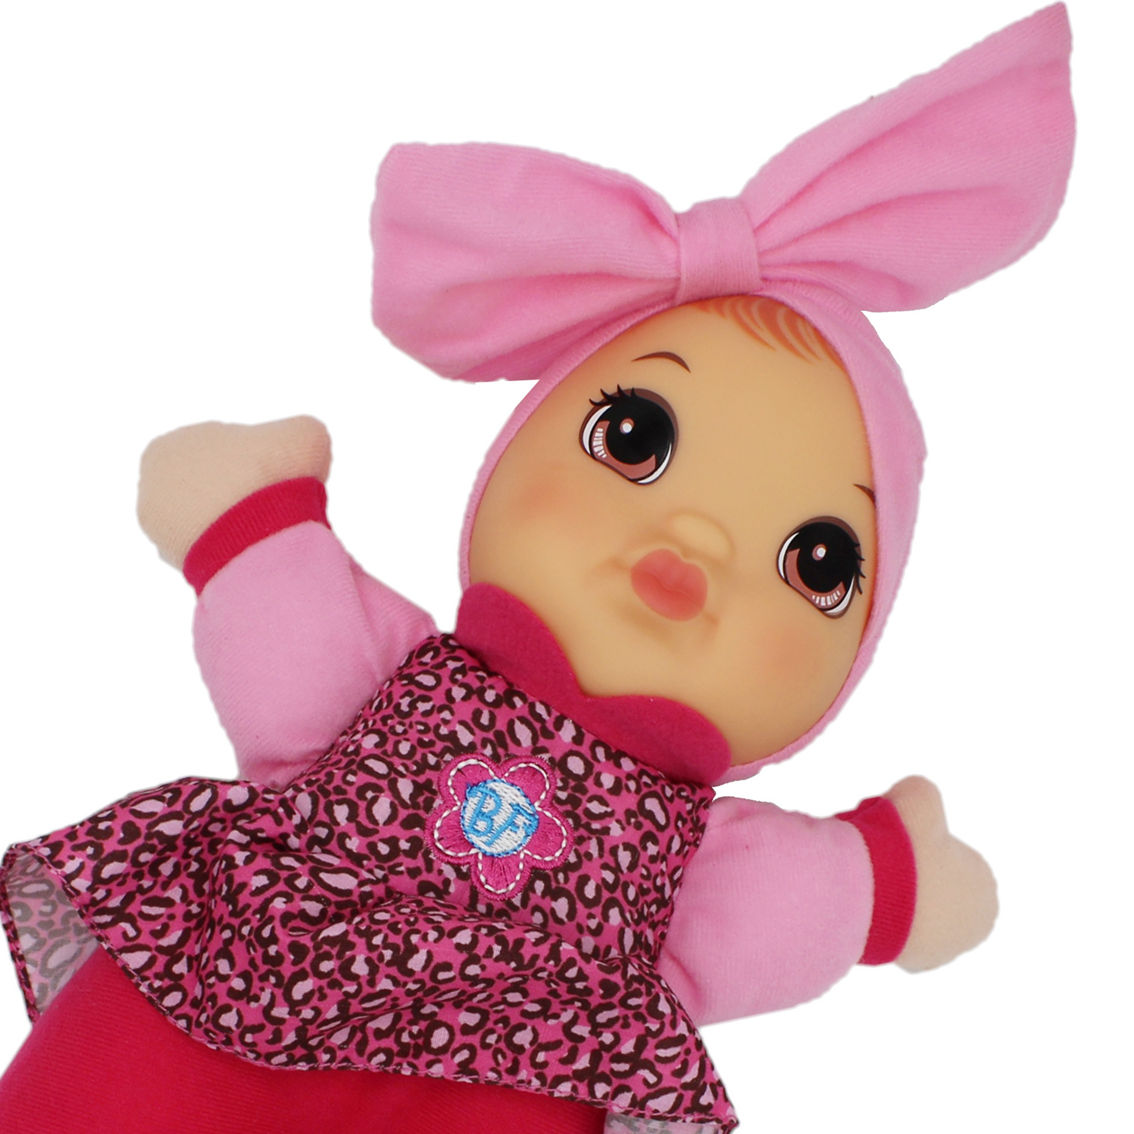 Goldberger Baby's First Kisses Bi Lingual Doll, English and Spanish - Image 5 of 5